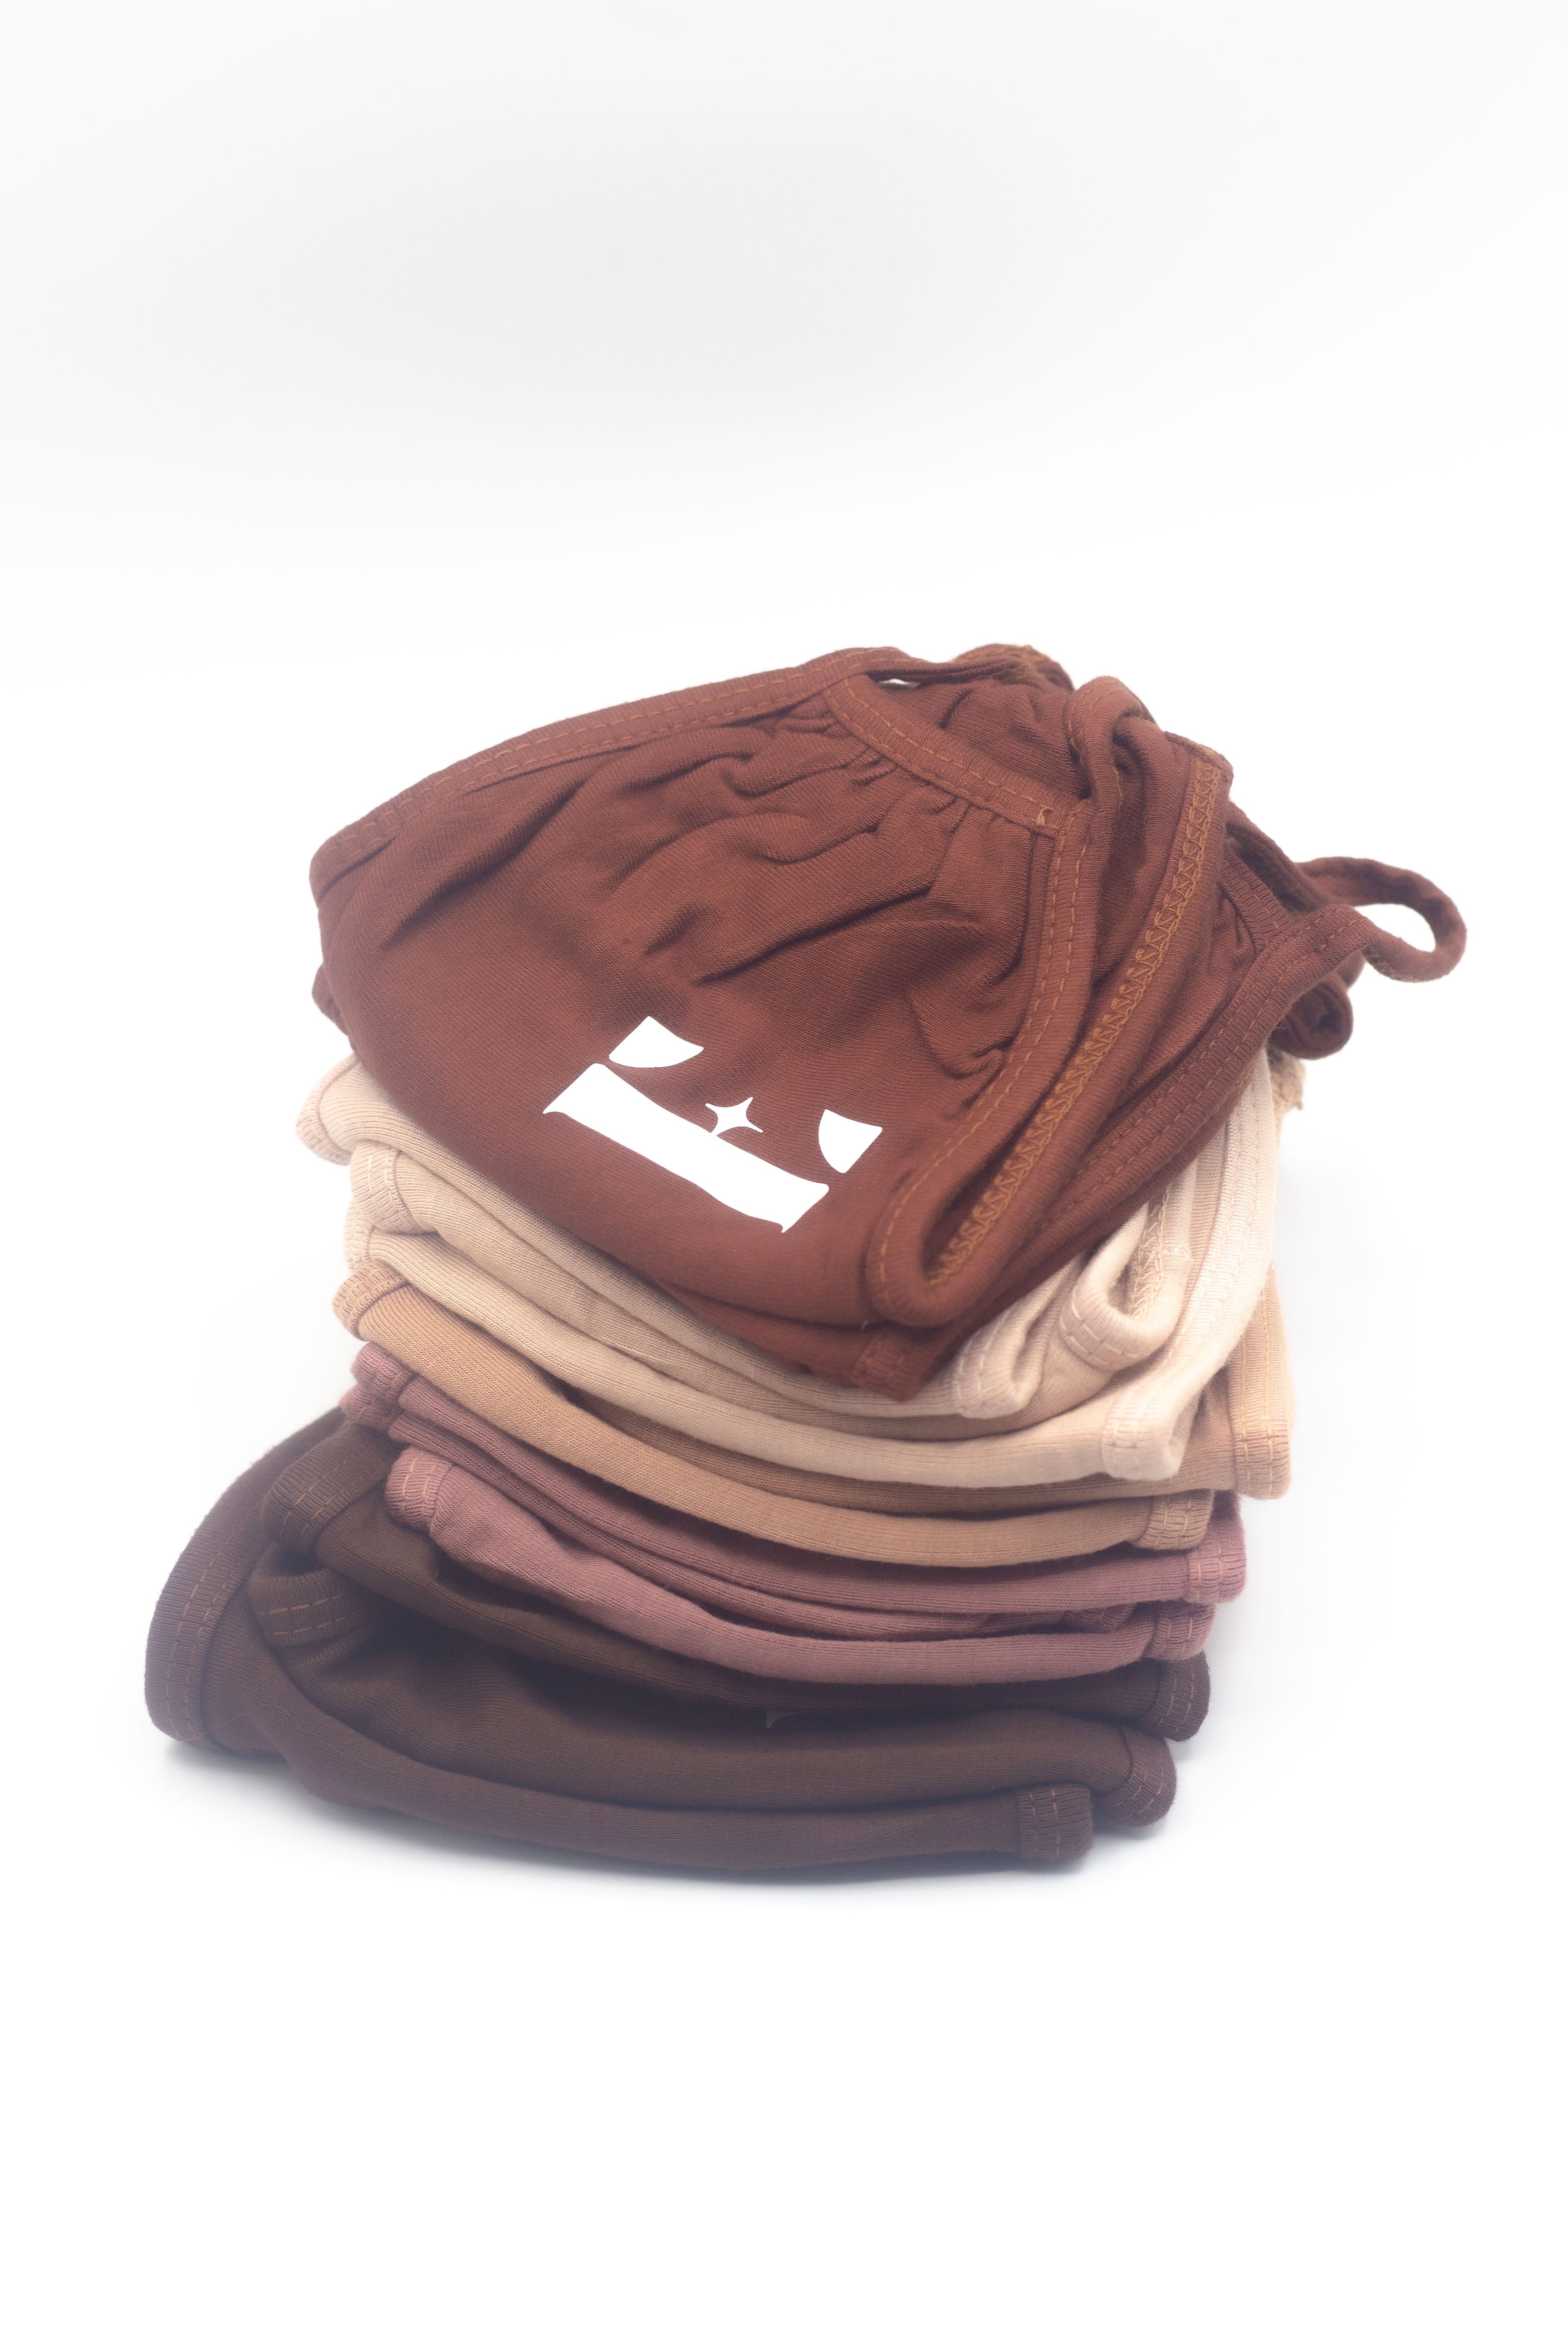 From the bottom up, there are dark brown, mauve, light brown, beige, and chocolate coloured face masks stacked on each other.  Reusable Masks (5 Piece) by E's Element.